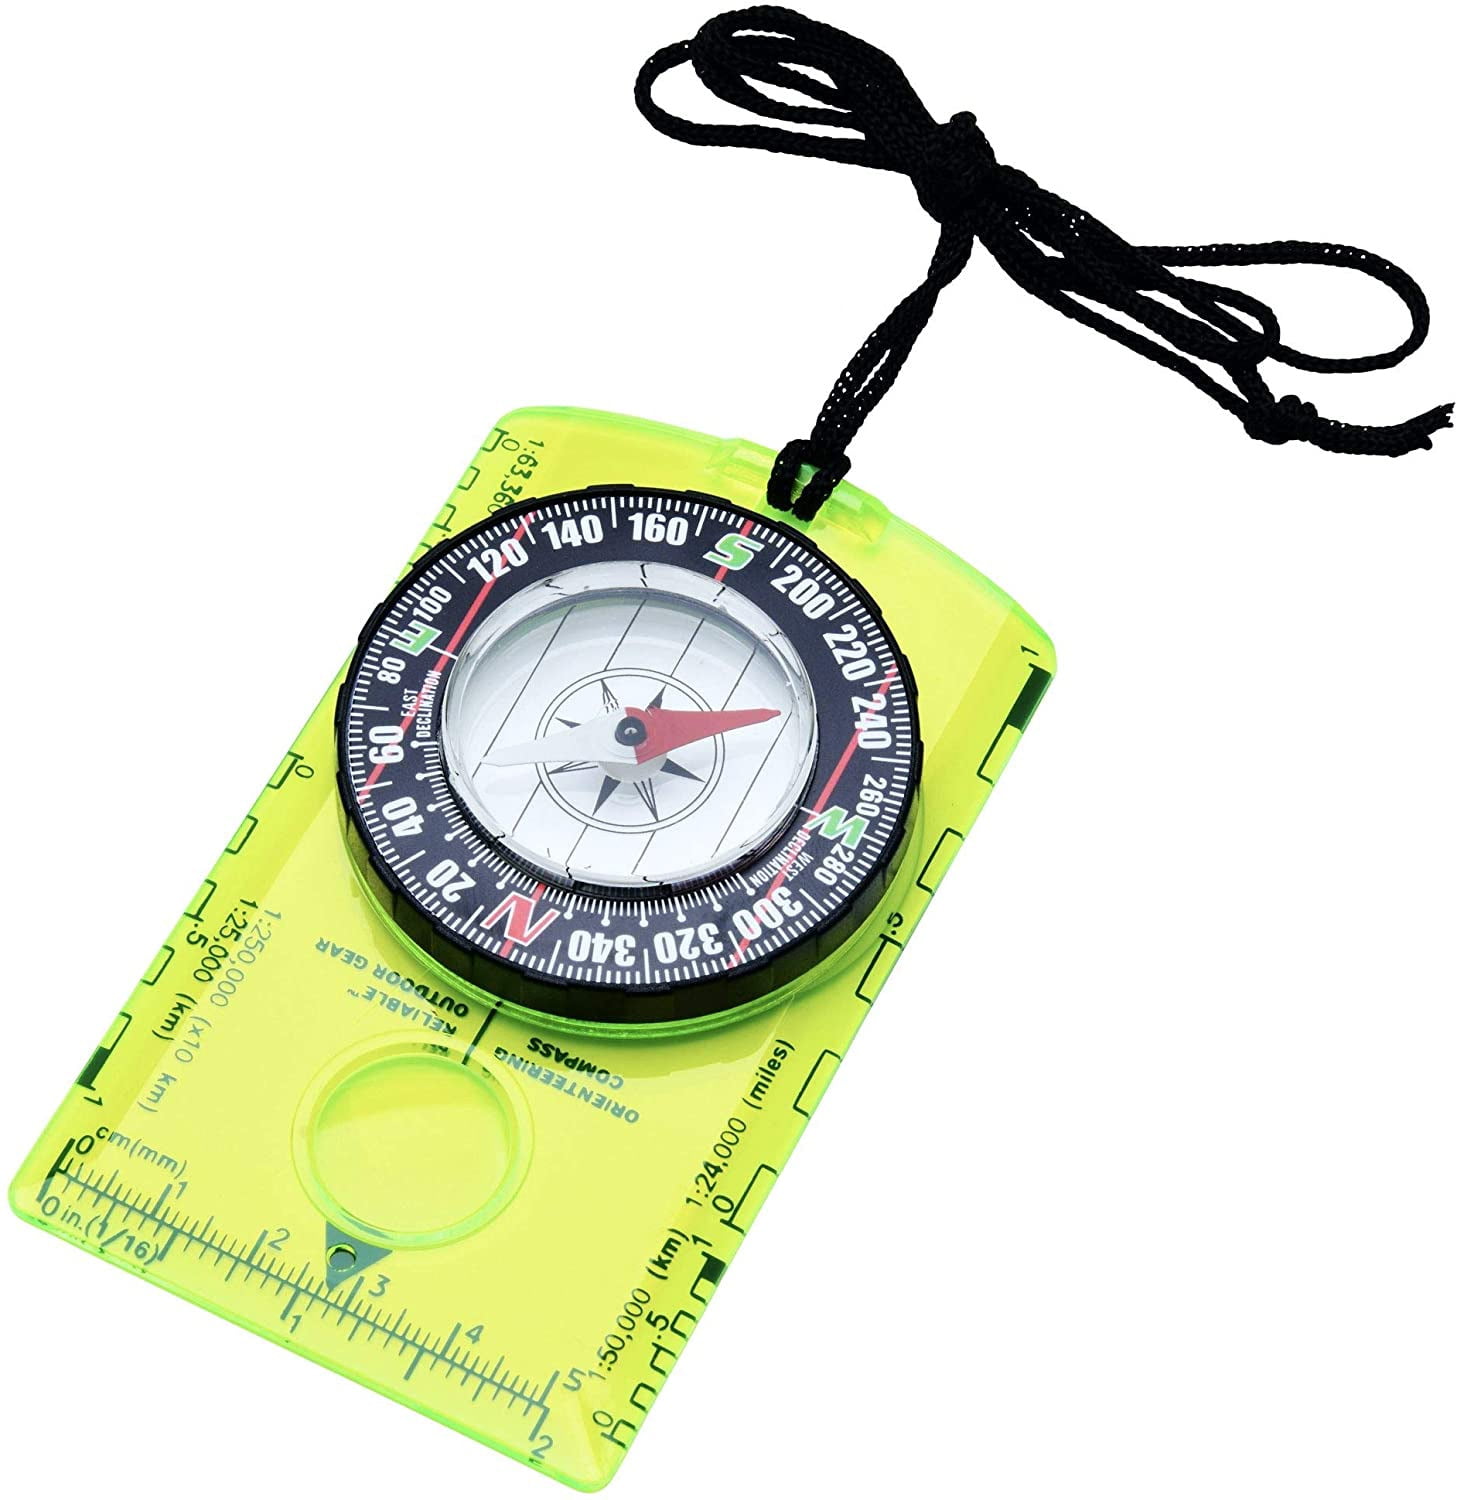 4 Set Kids Orienteering Compass with Emergency Whistles Hiking Backpacking Compass Scout Boy Waterproof Compass Gift for Map Reading Outdoor Camping 